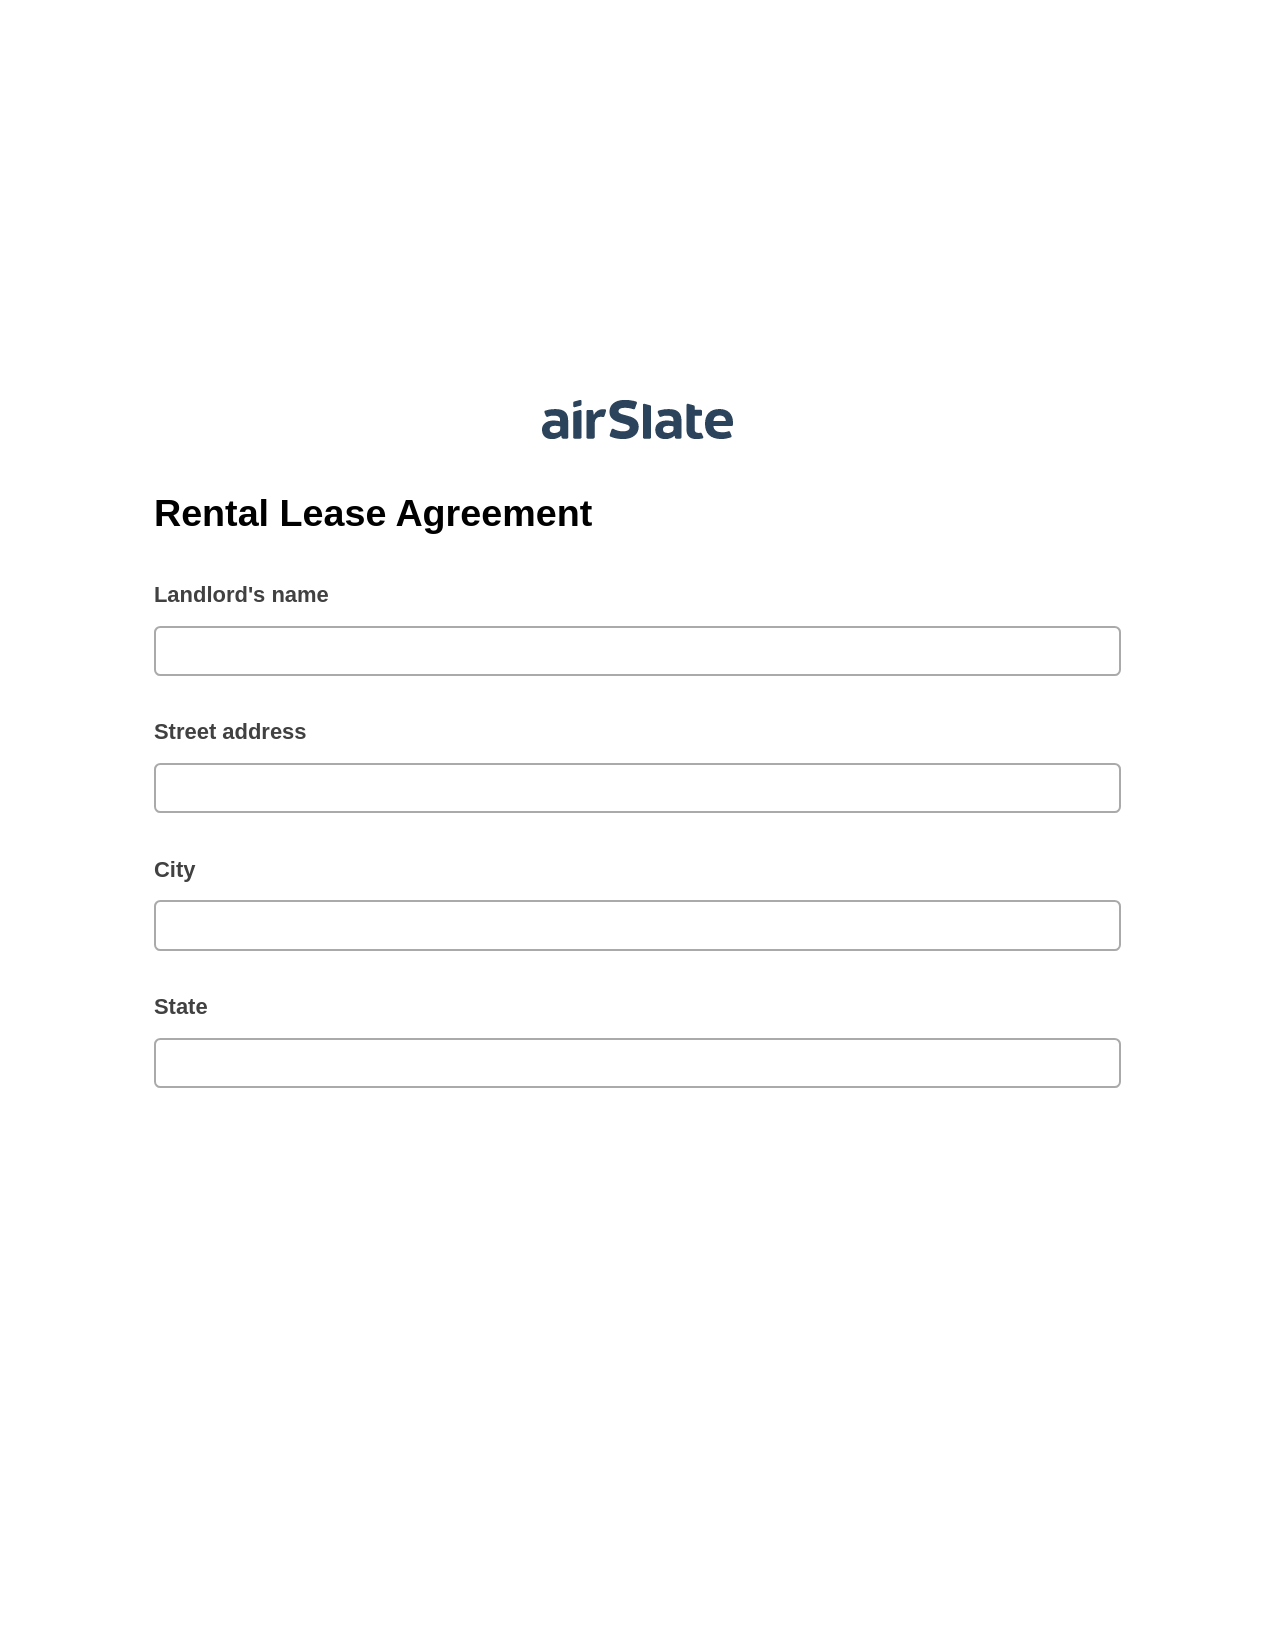 Multirole Rental Lease Agreement Pre-fill from Excel Spreadsheet Bot, Create Slate every Google Sheet Update Bot, Archive to SharePoint Folder Bot